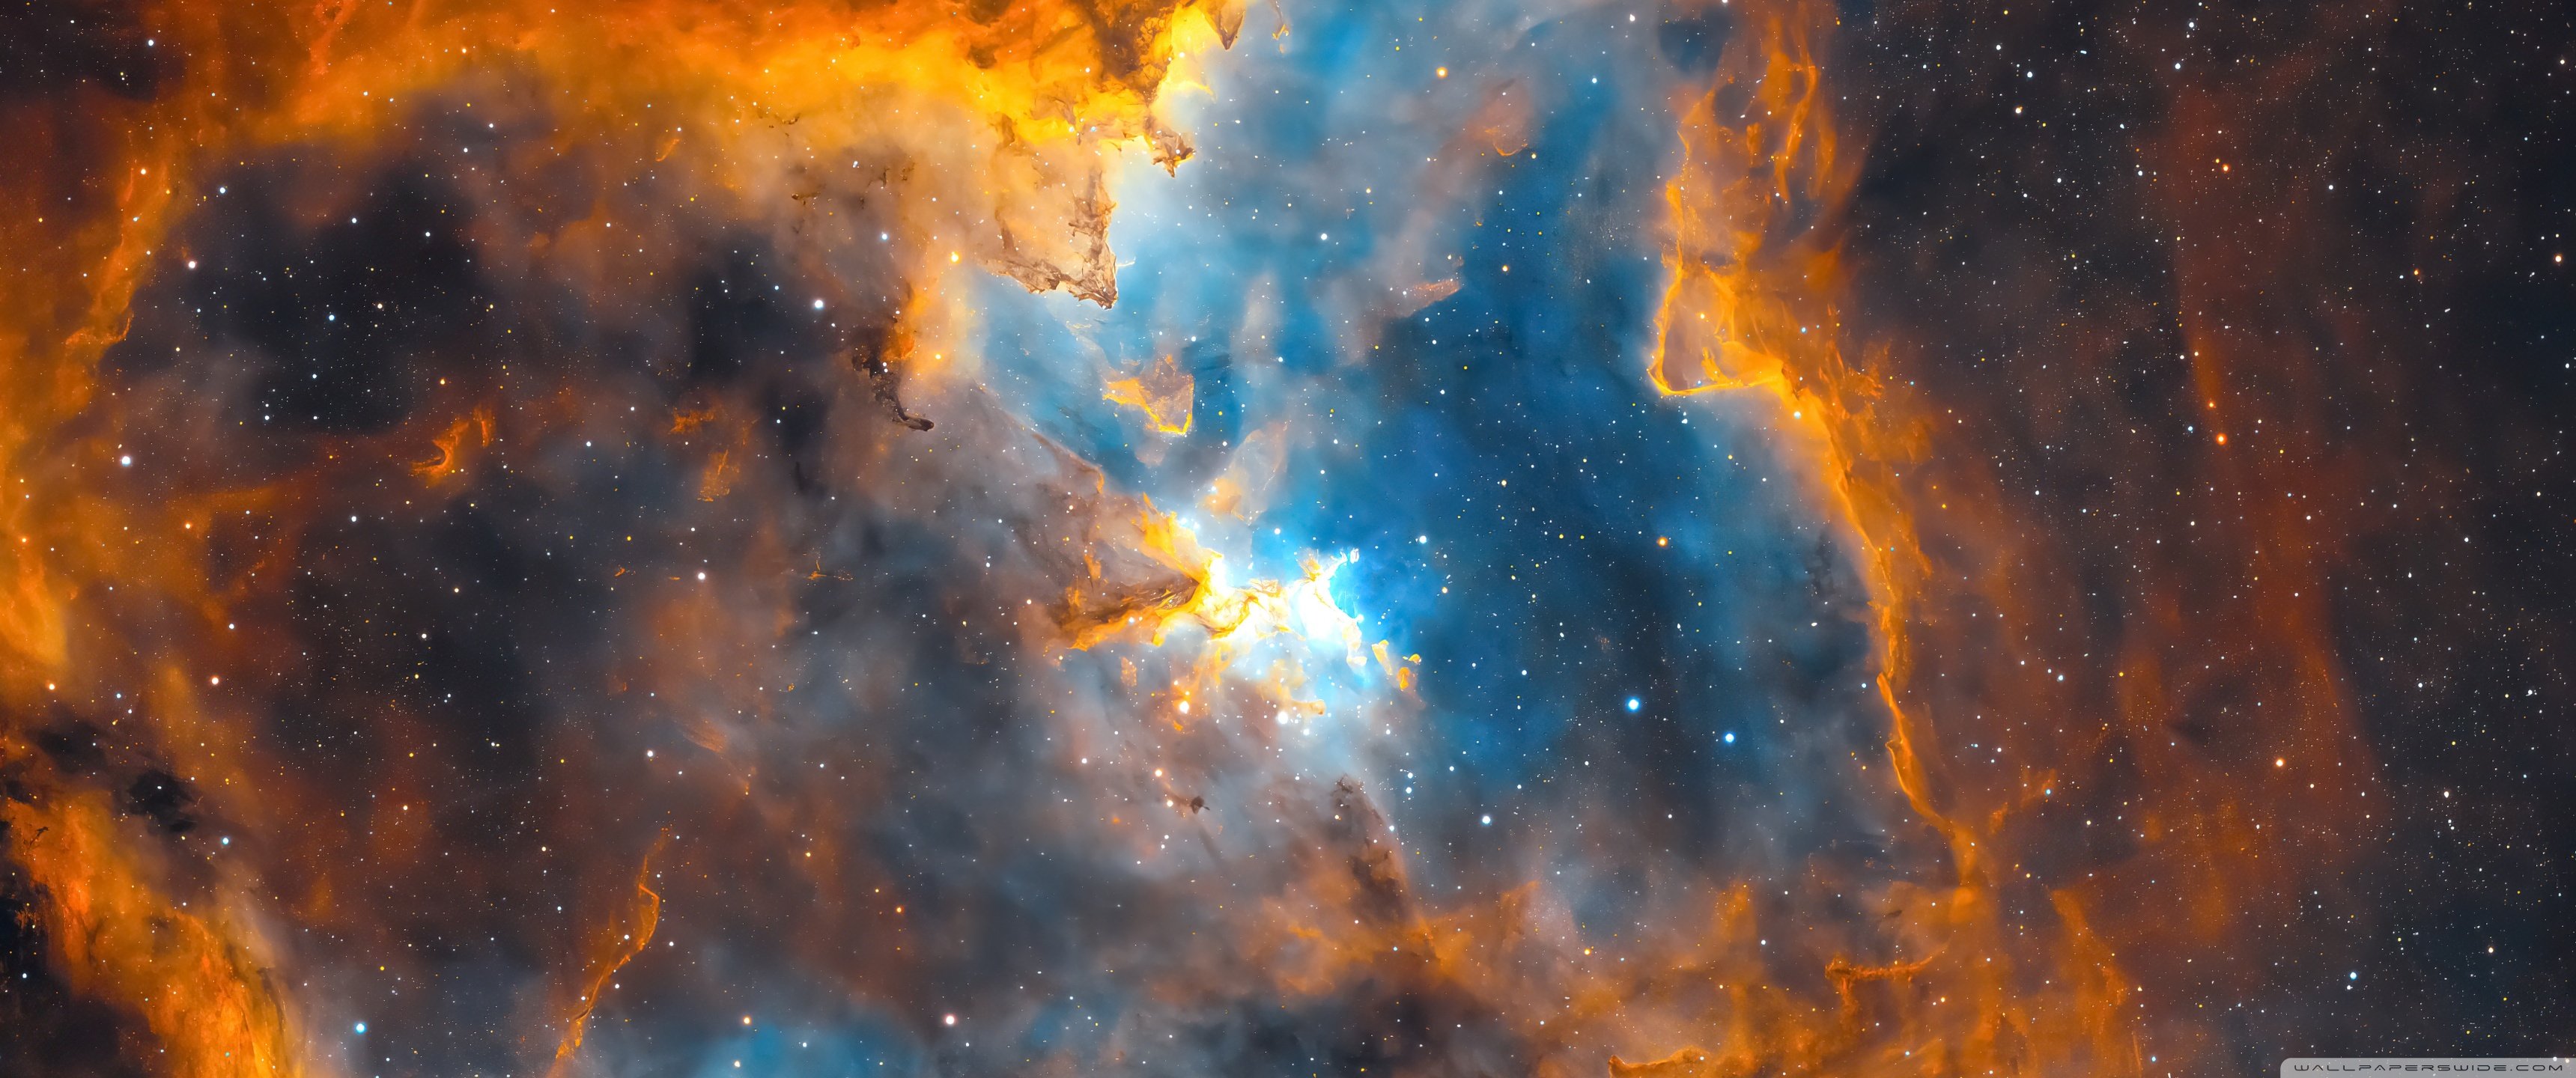 space hd wallpapers widescreen